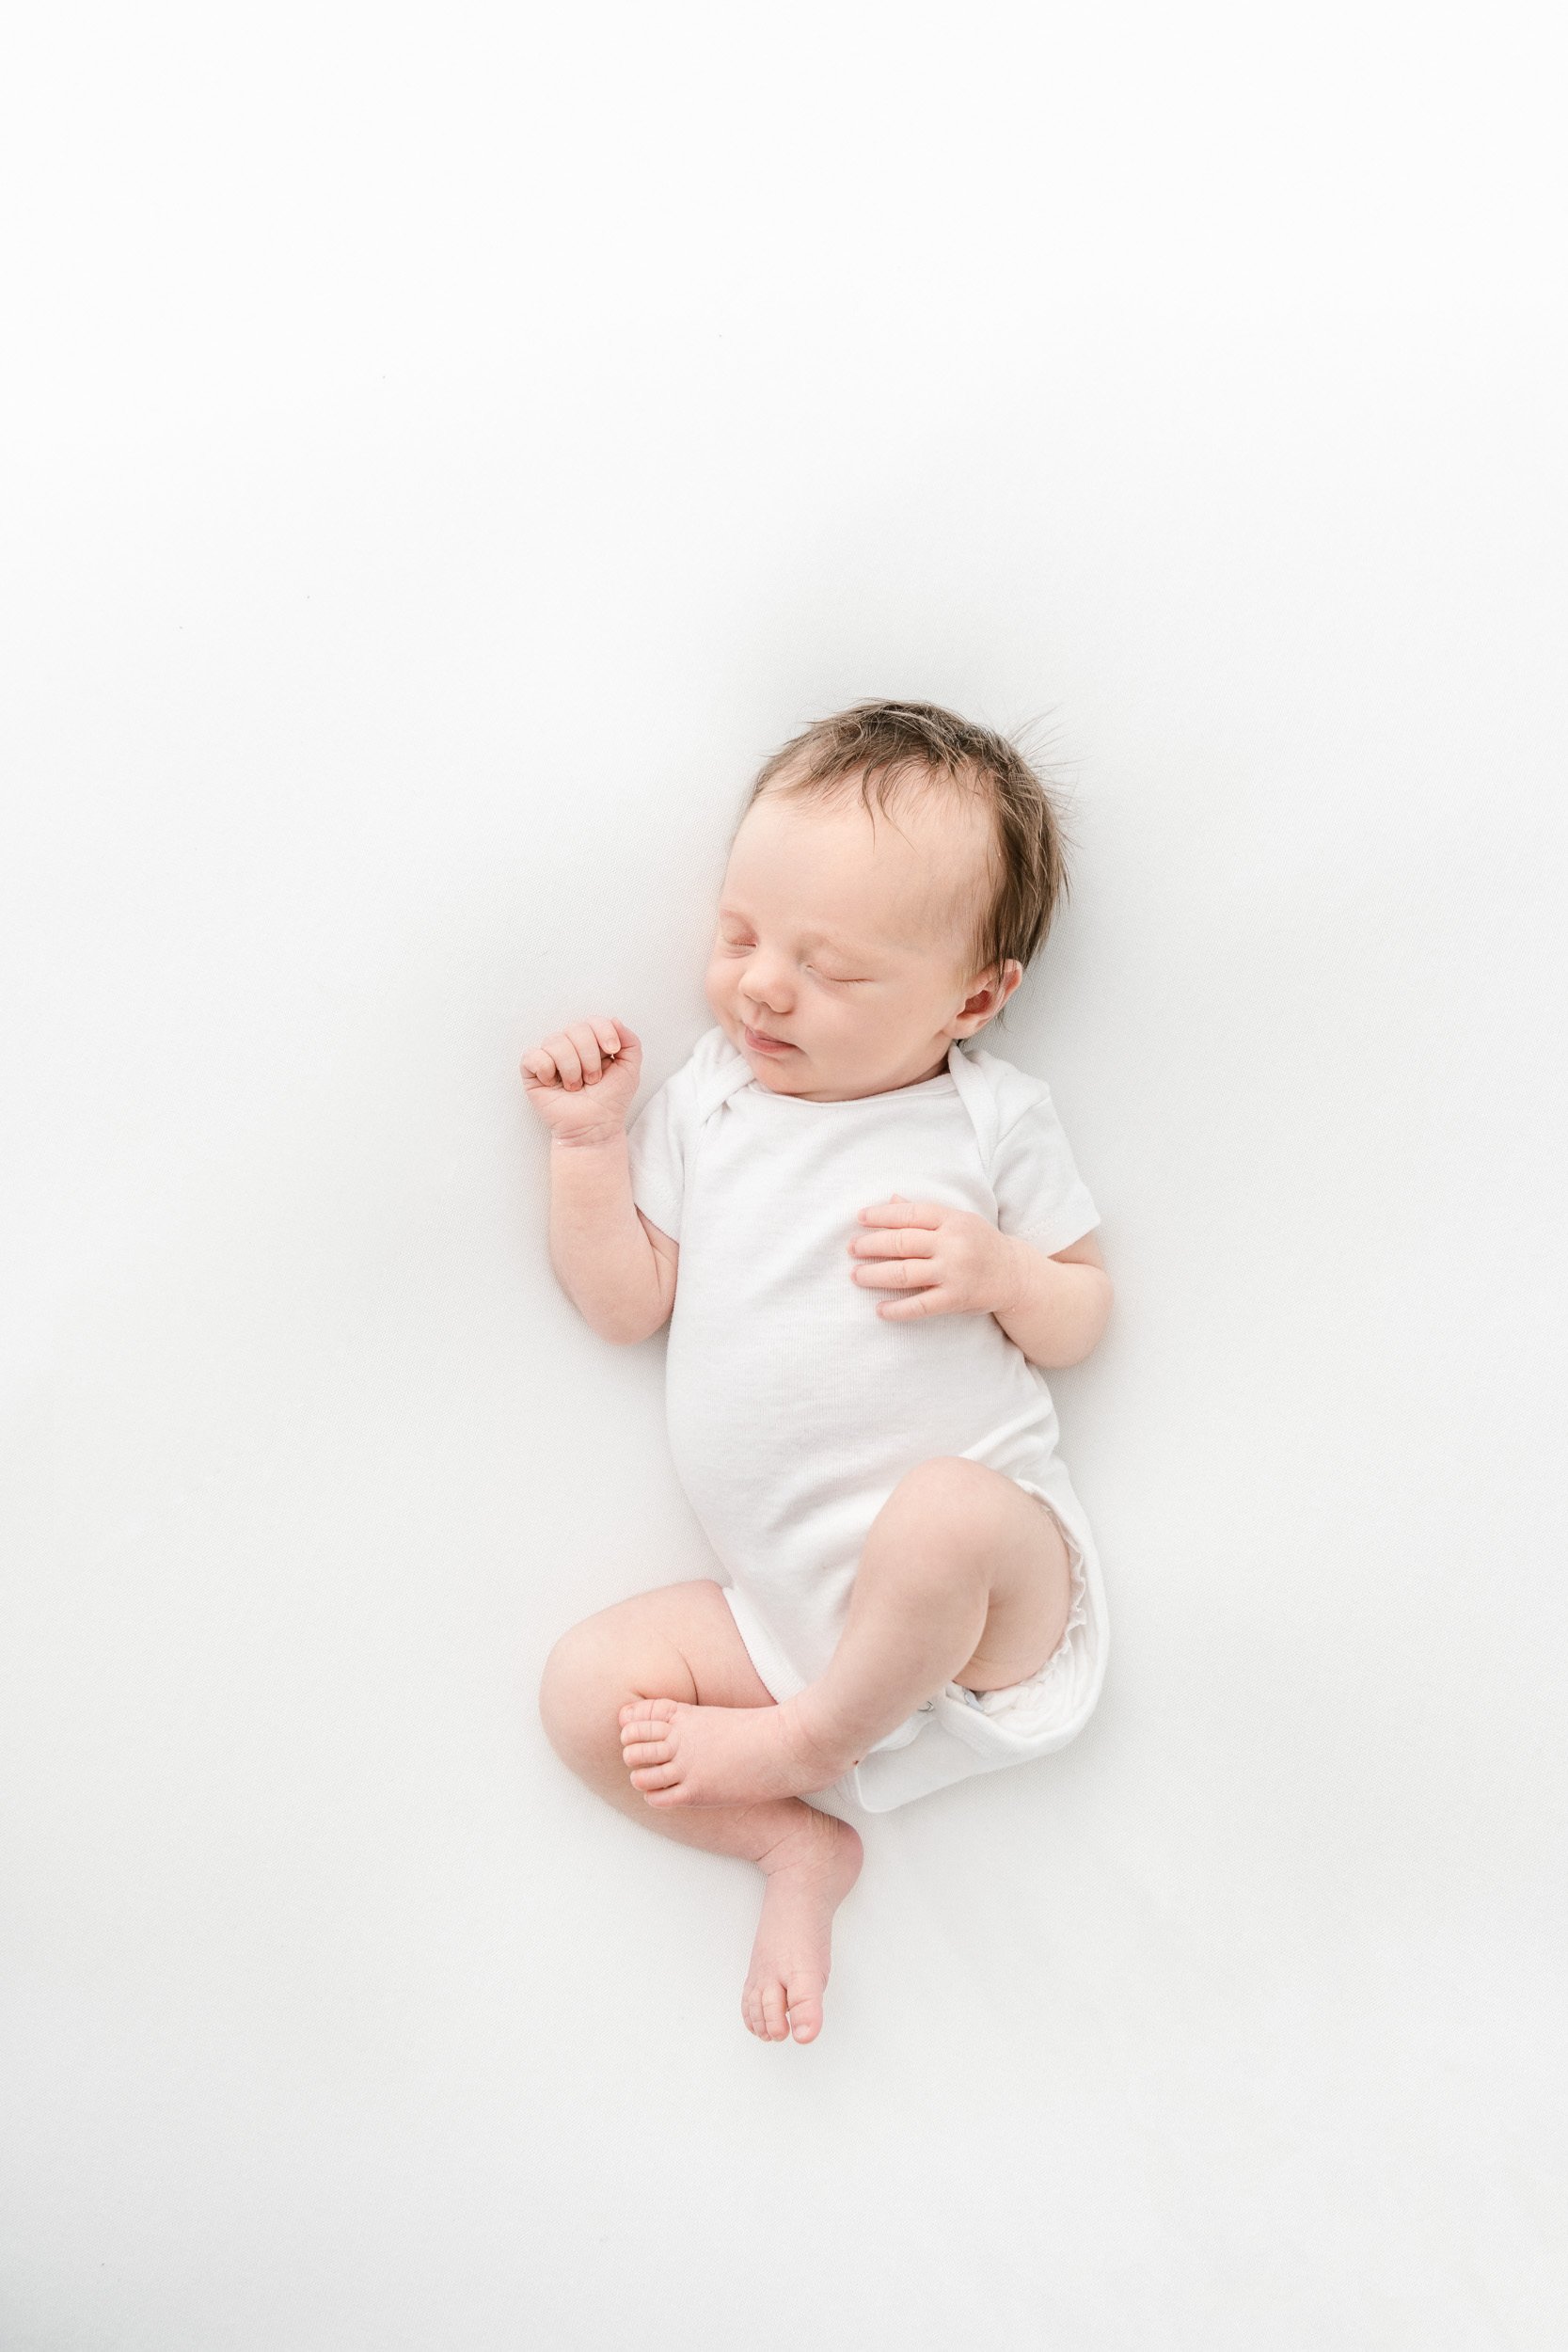  A little girl in a white onesie sleeping during a newborn session with Nicole Hawkins Photography in New Jersey. simple newborns #NicoleHawkinsPhotography #NicoleHawkinsNewborns #StudioPhotography #NewYorkPhotographer #NJphotographers #newborn 